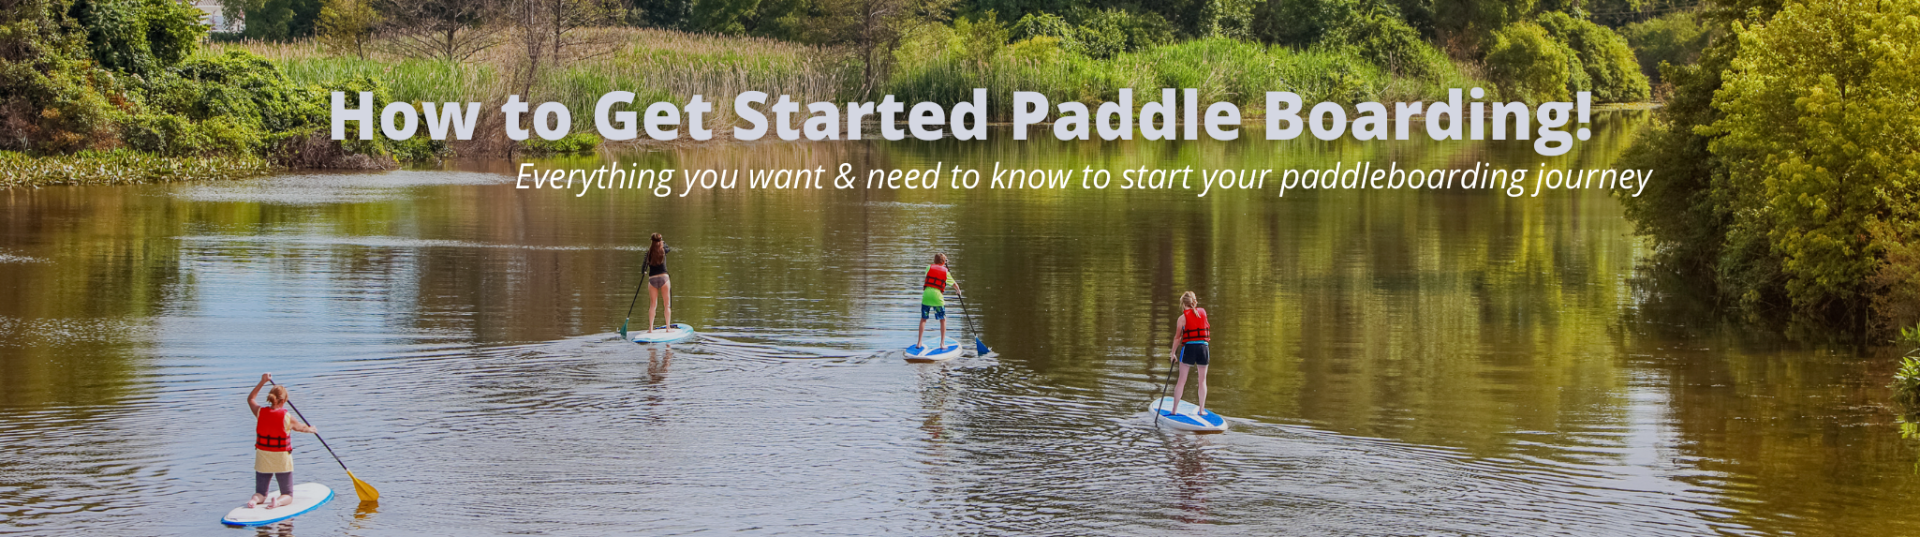 How to Get Started in Paddle Boarding.